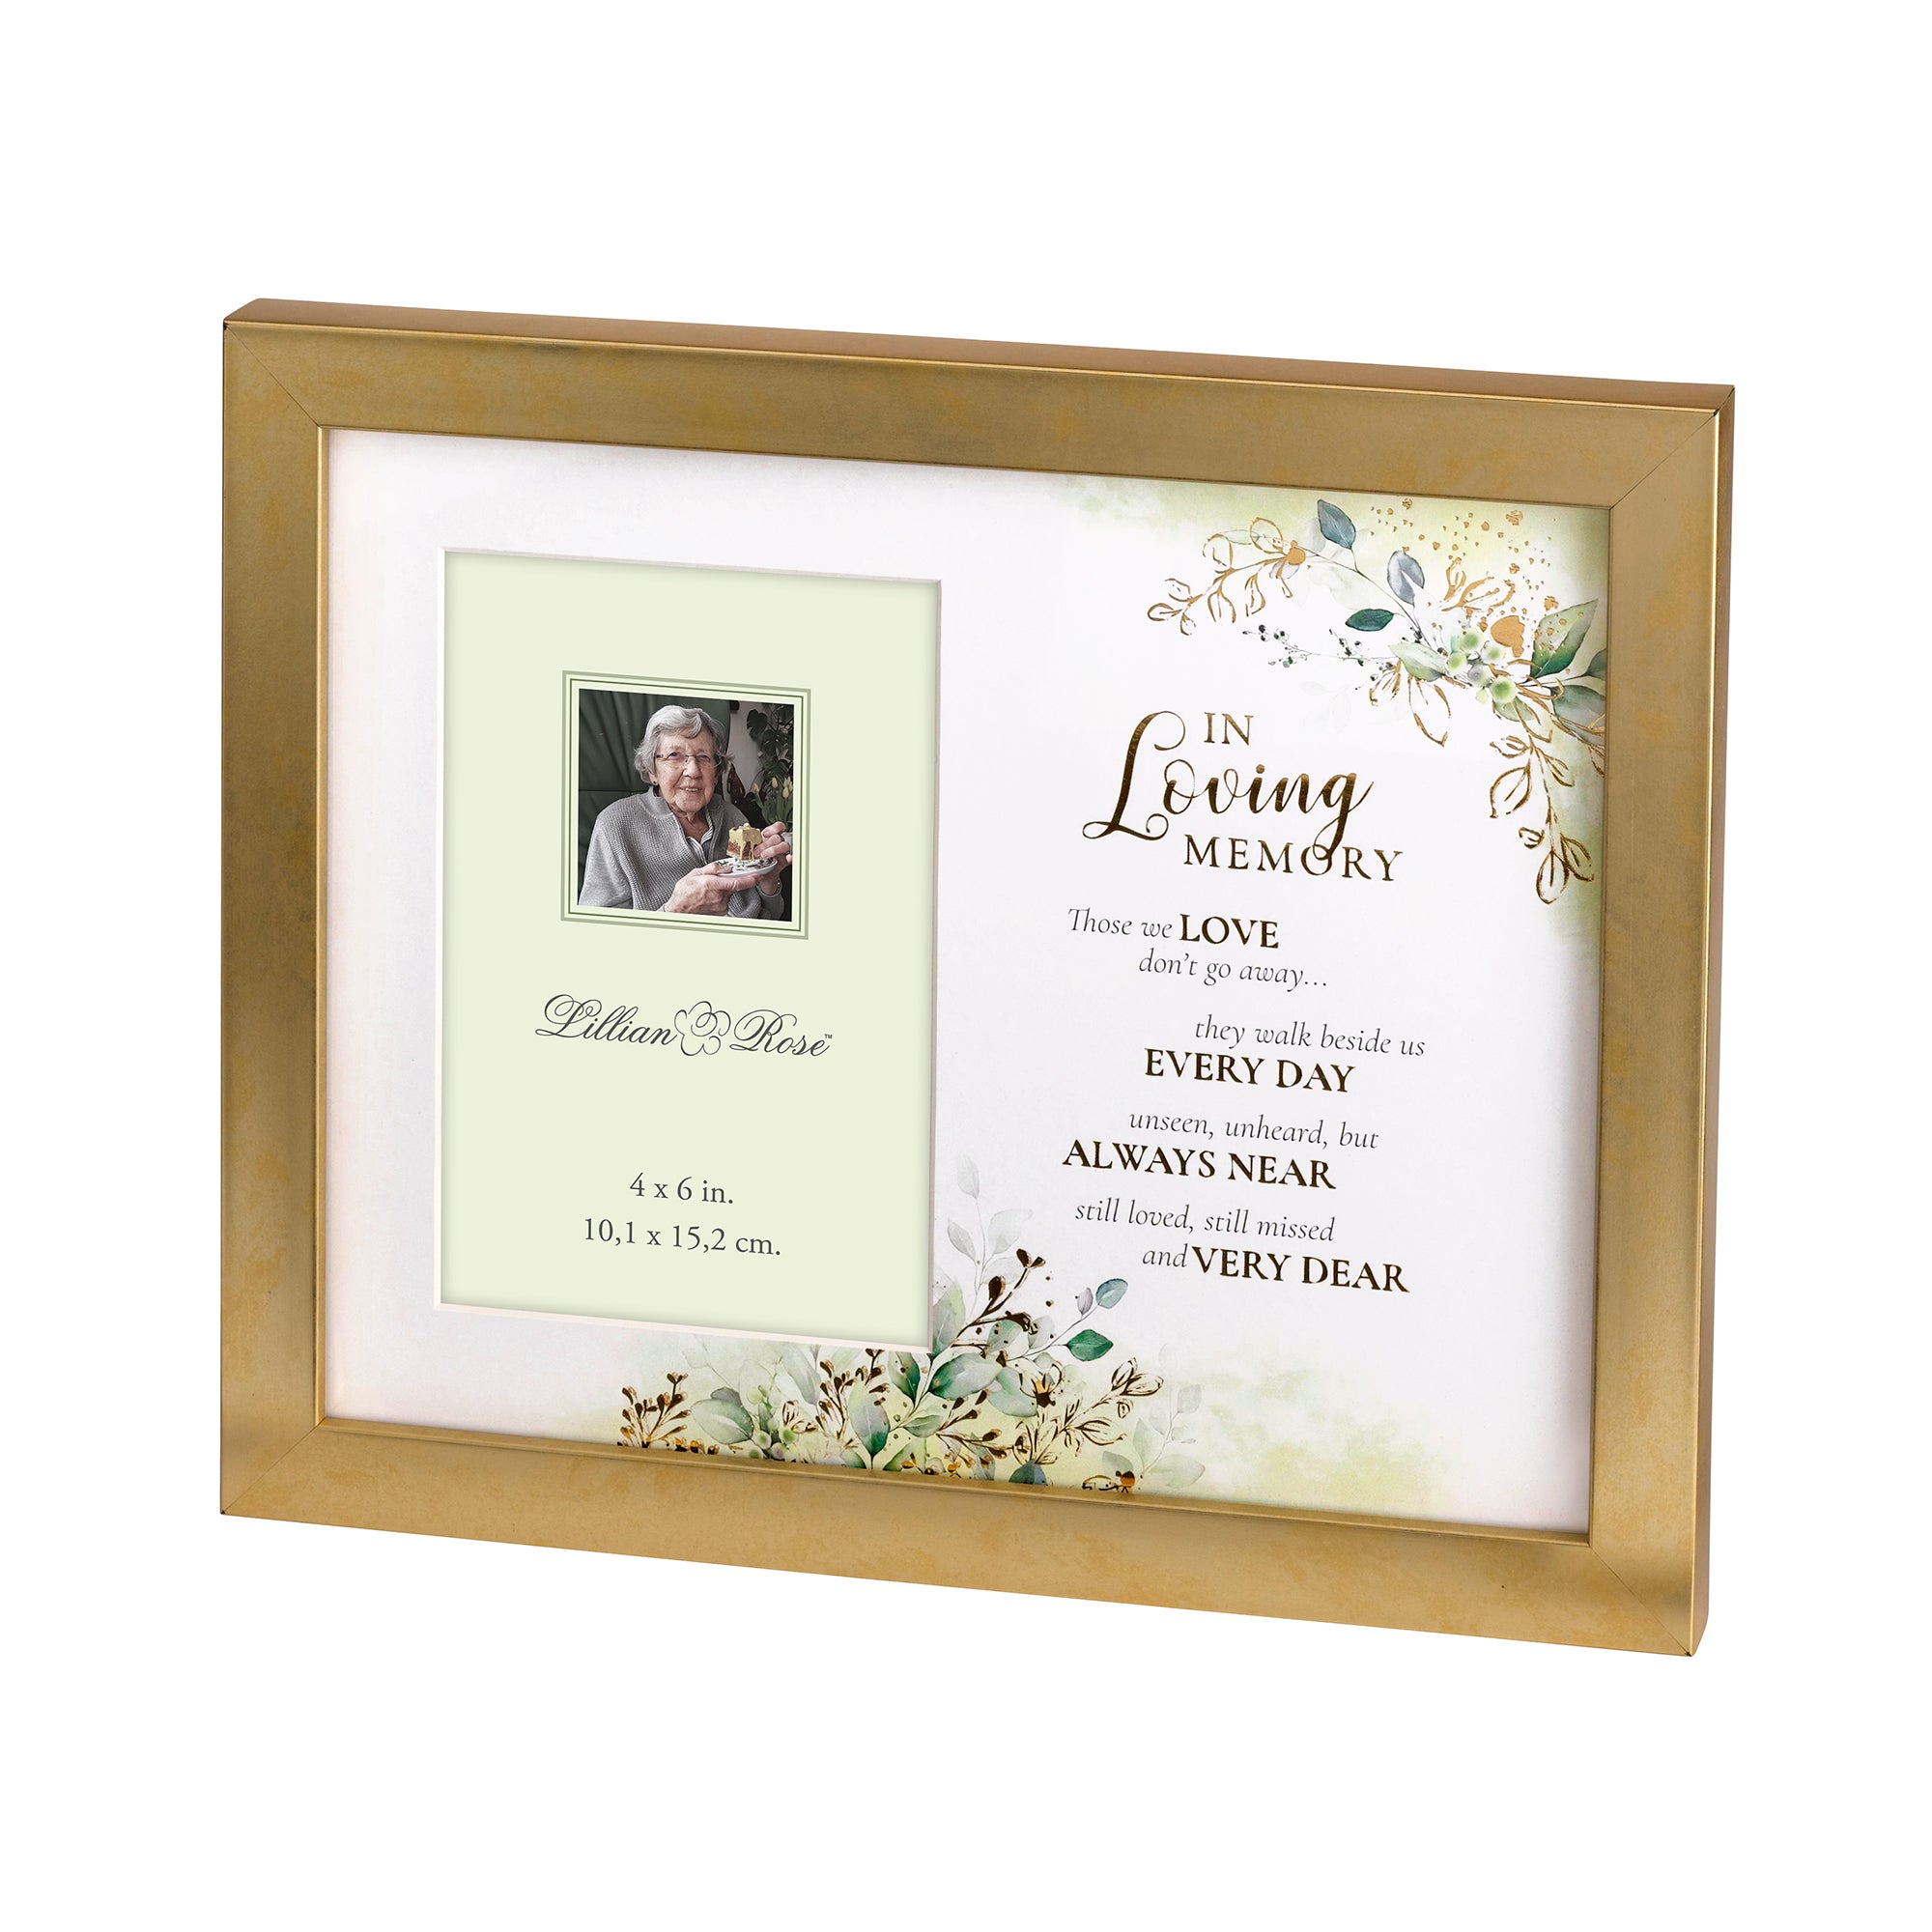 Botanical Themed Memorial Photo Frame with Sympathy Verse